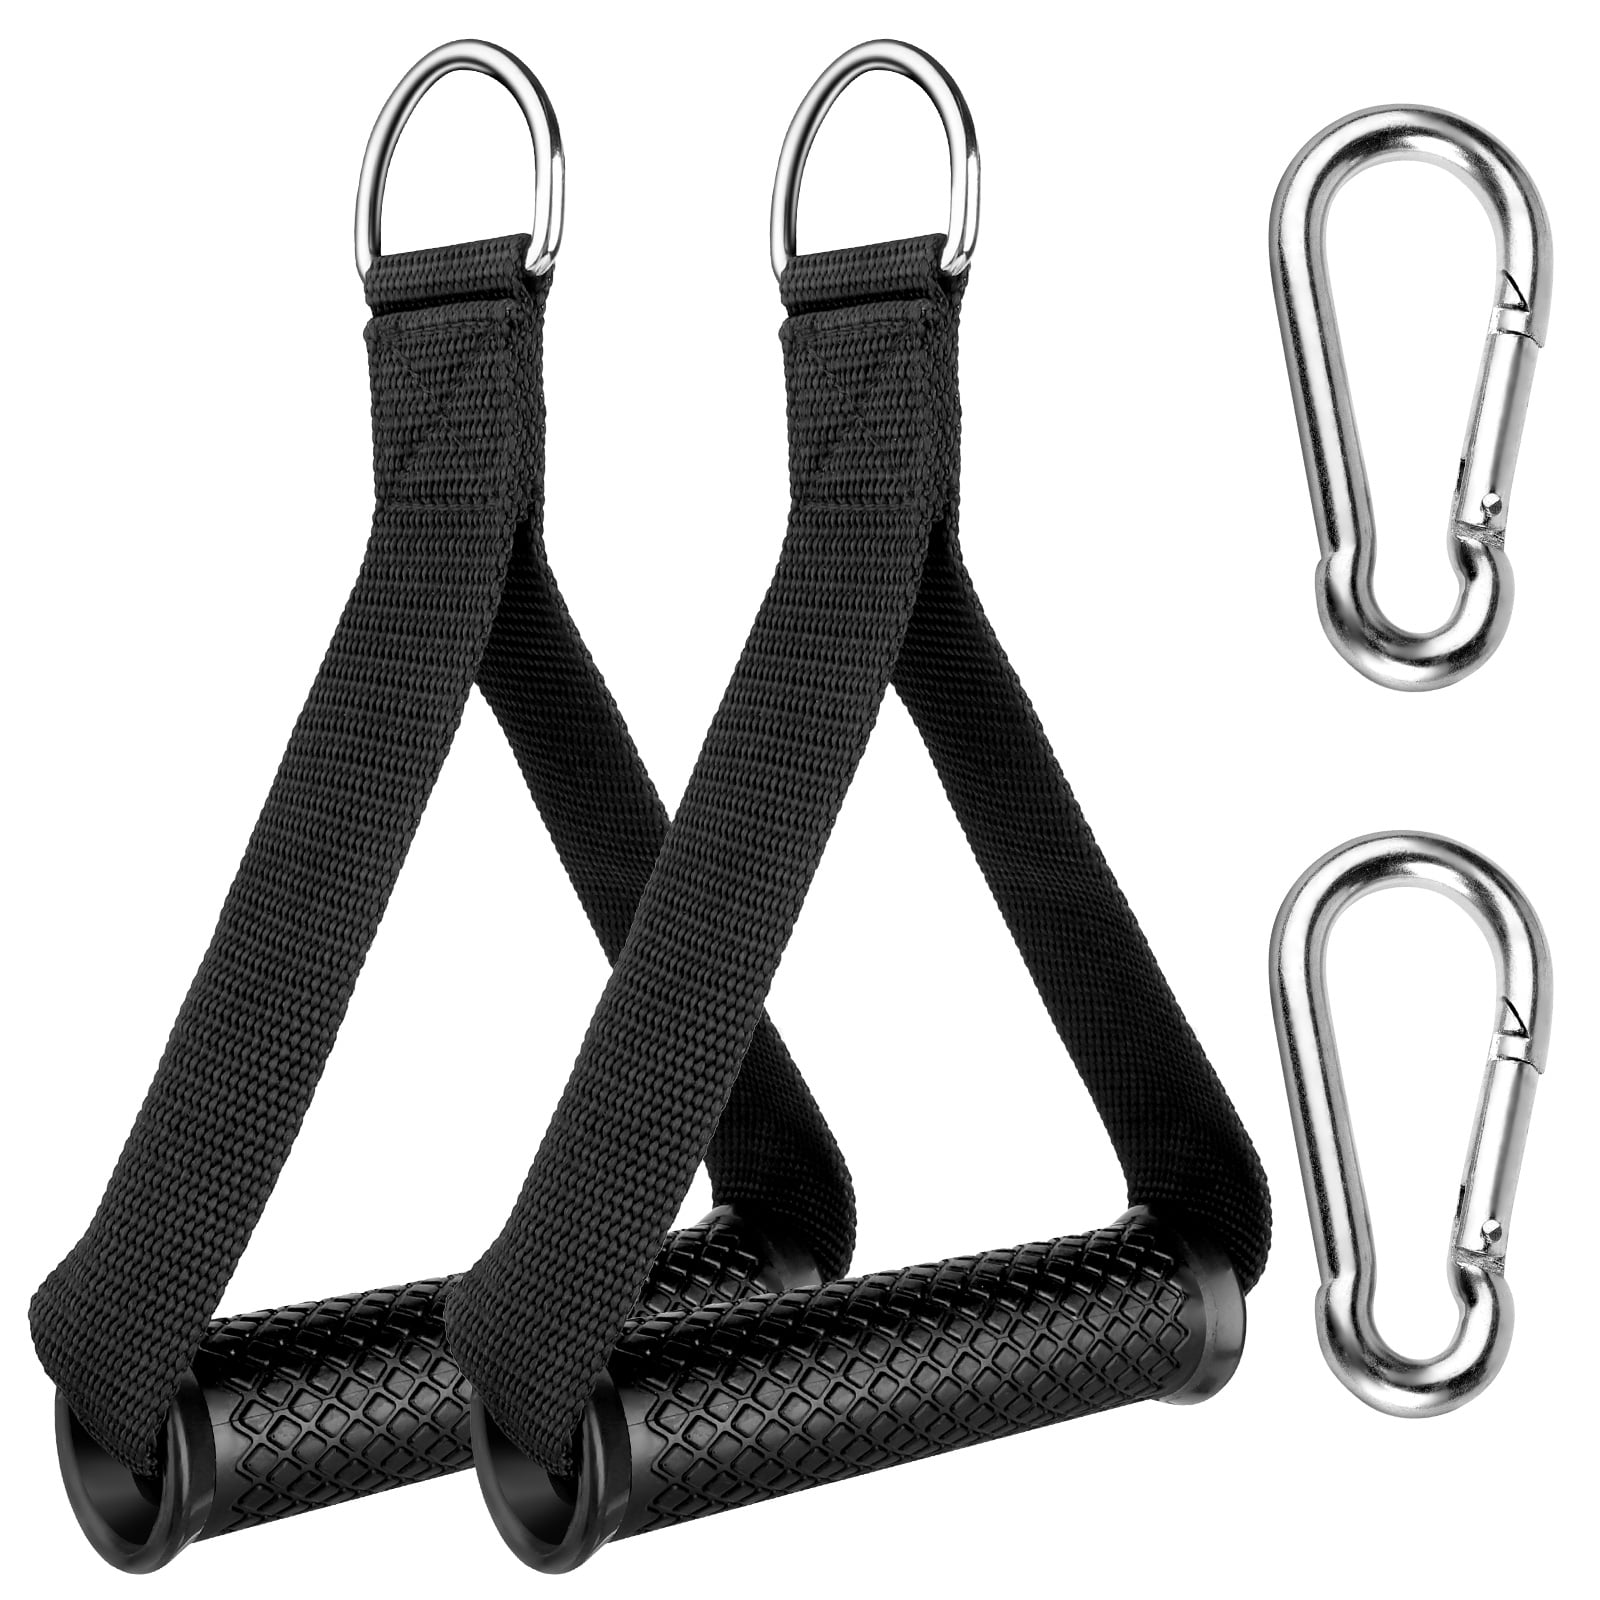 Heavy Duty Exercise Handles, TSV Upgraded Premium Thick Gym Cable Machine  Handles Resistance Band Grips Handle With 2 Heavy Duty Carabiner Hooks,  Great for Home, Gym, Yoga 